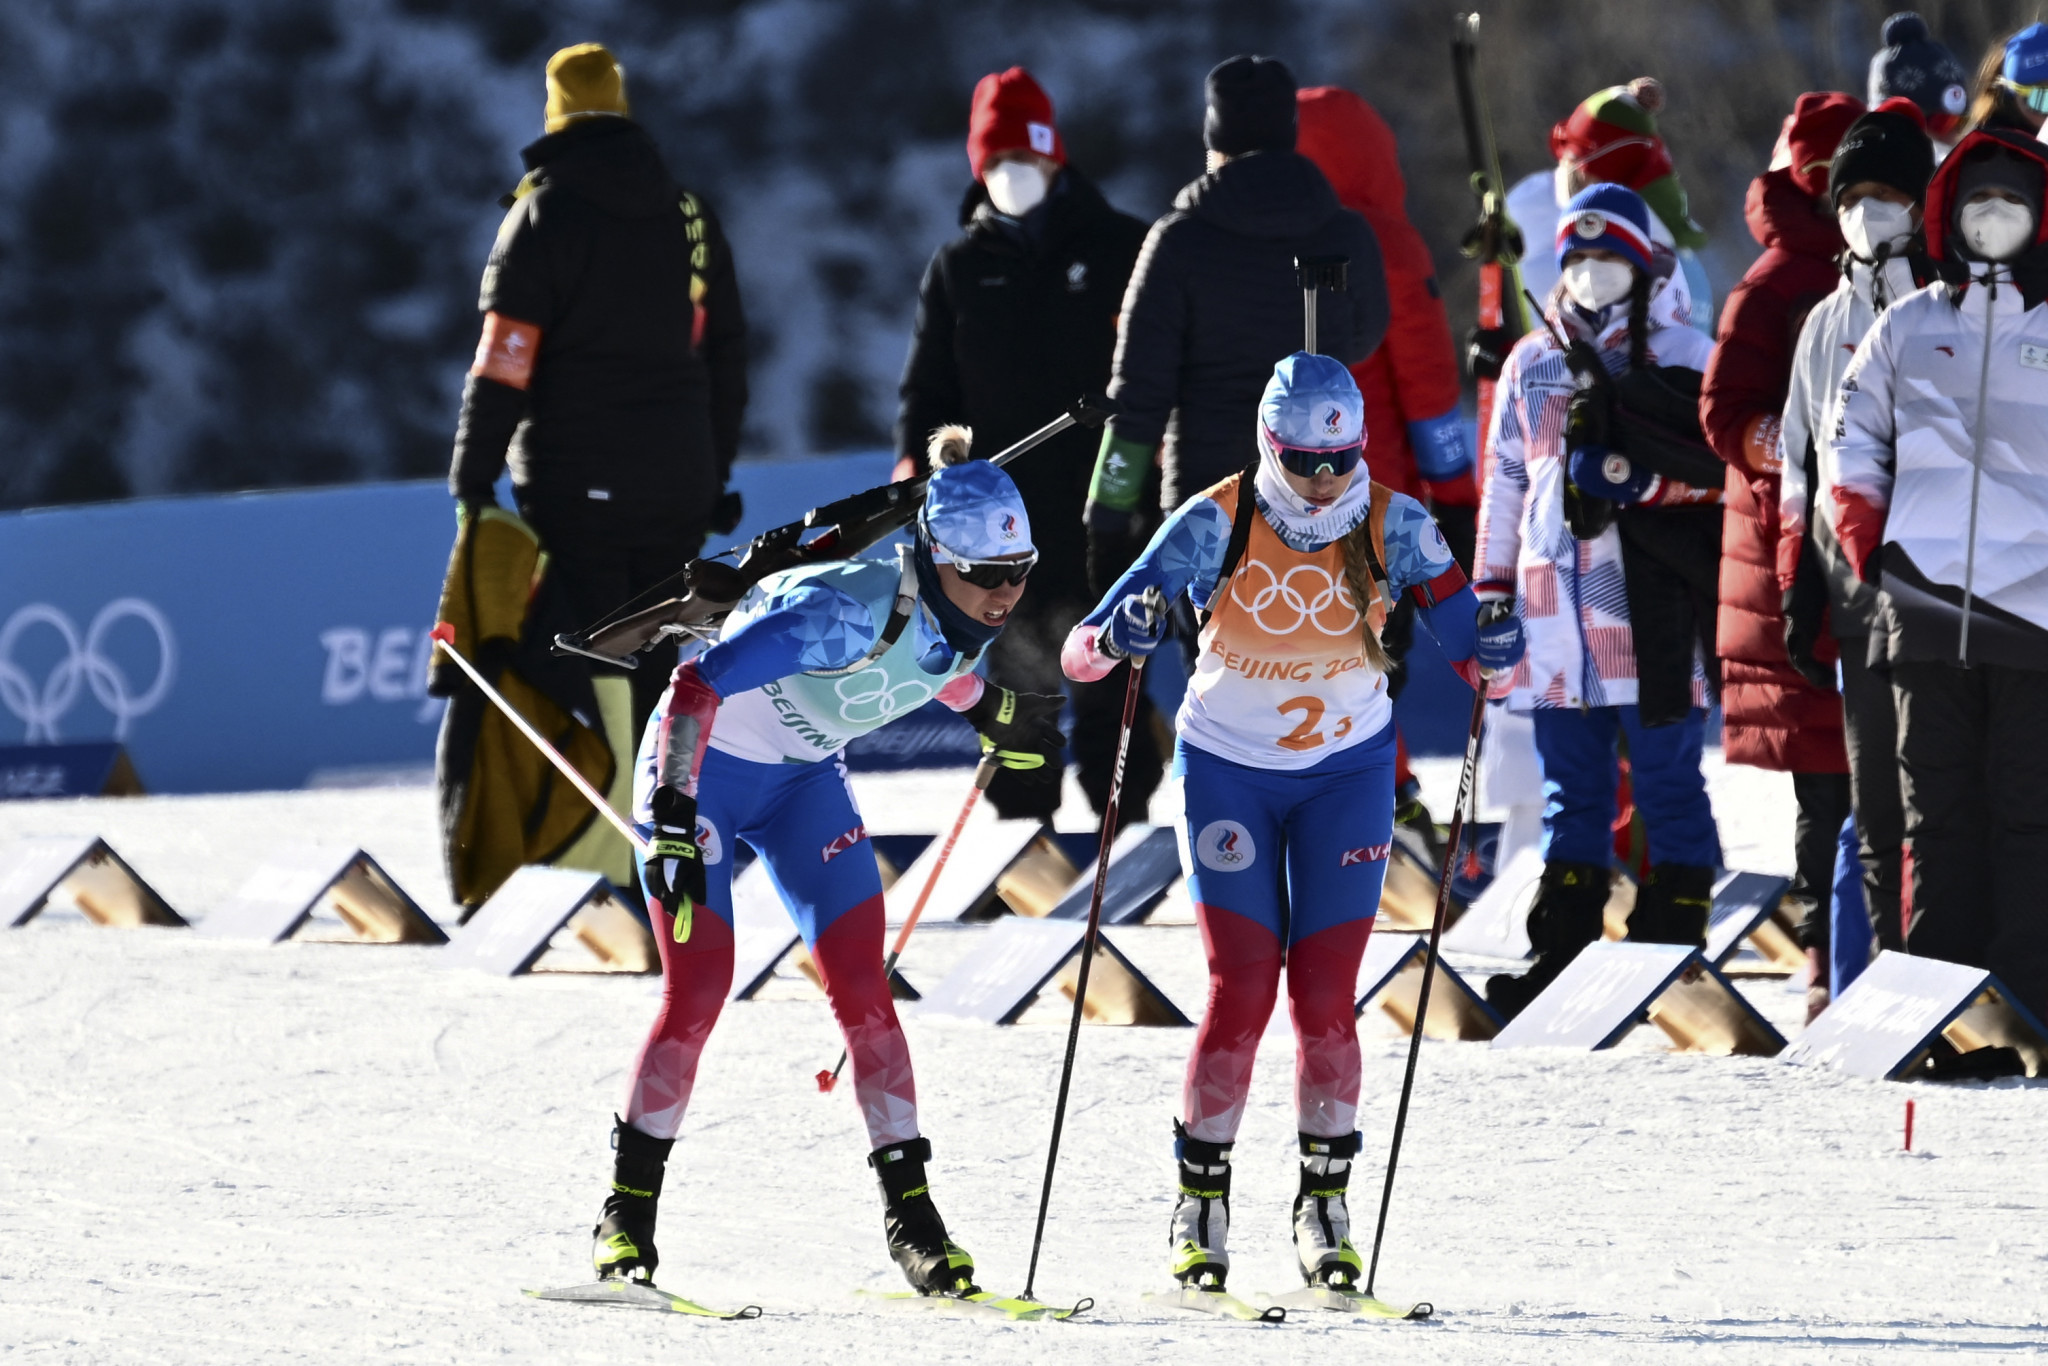 RBU to appeal to CAS against IBU decision requiring athletes to compete as neutrals